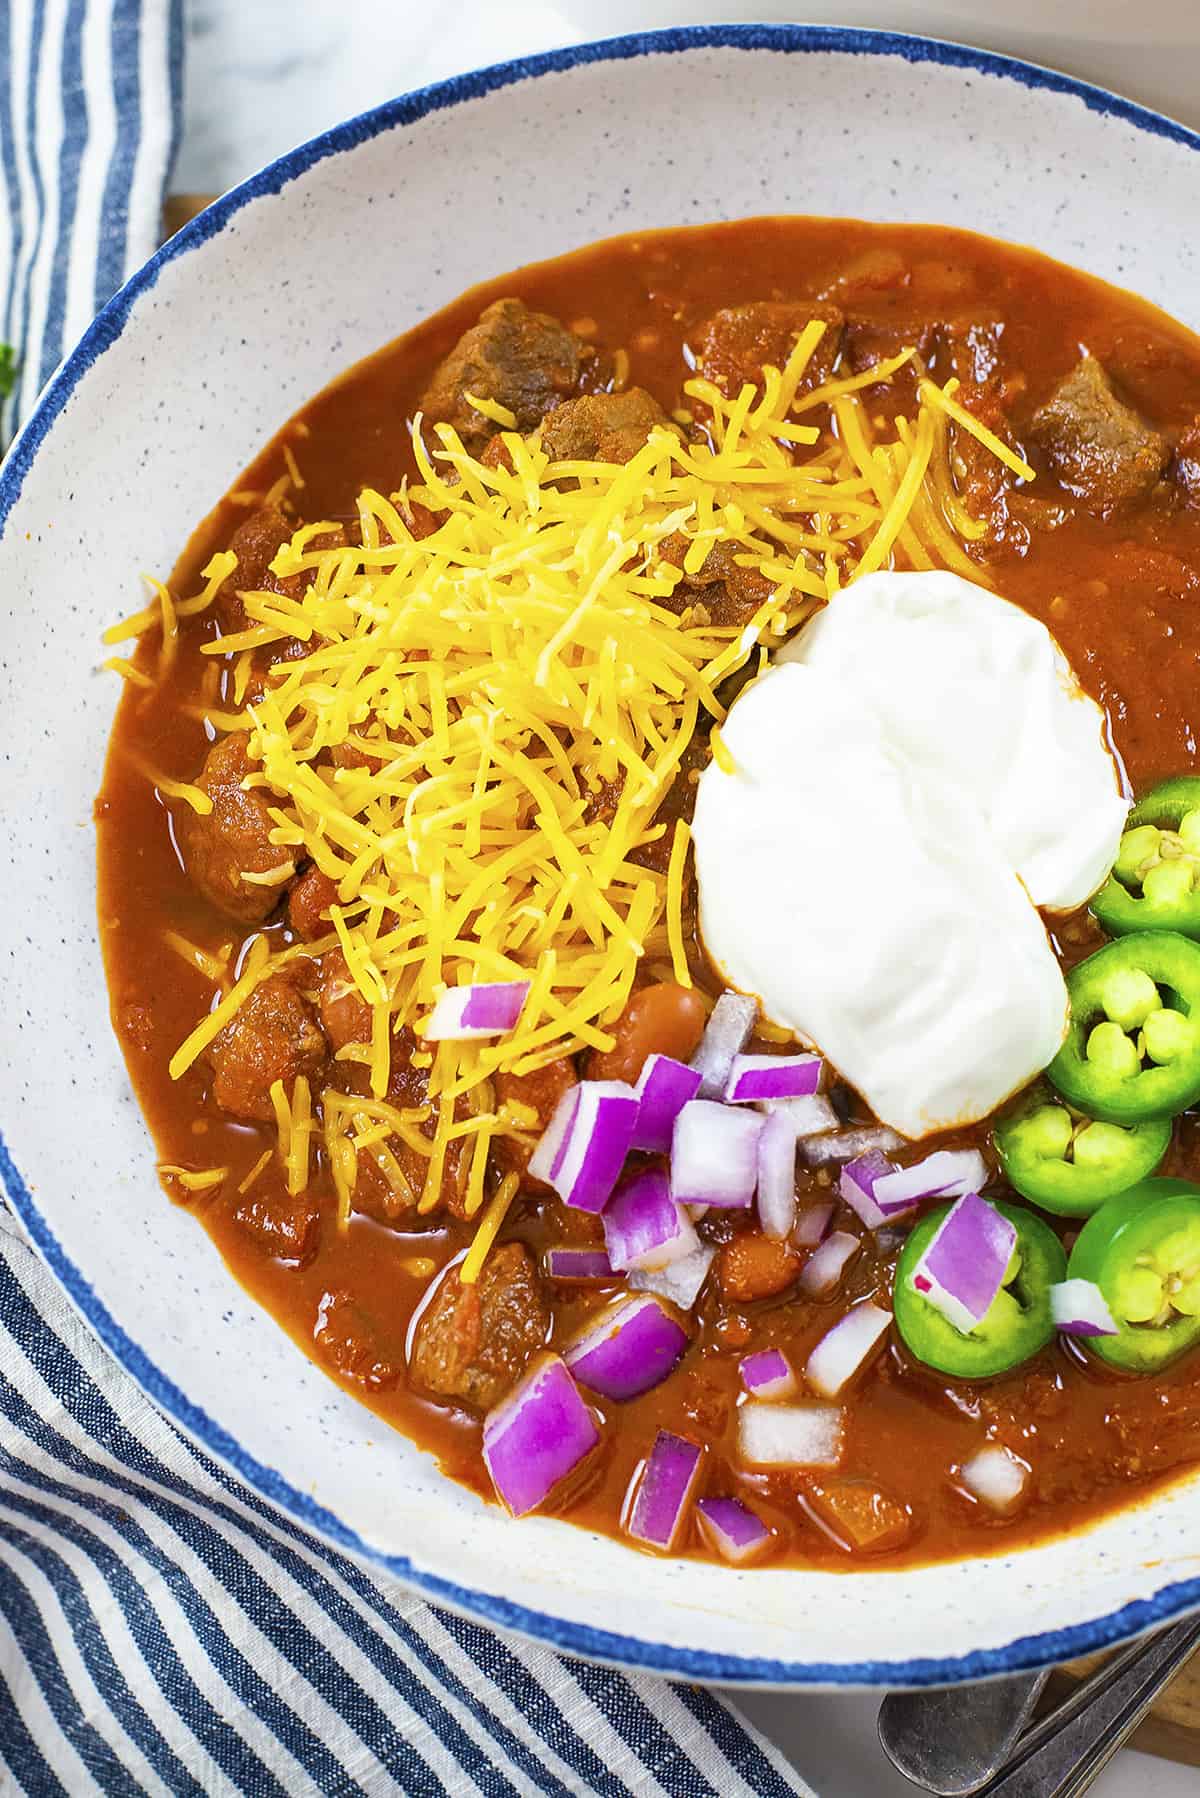 Overhead view of steak chili in bowl.